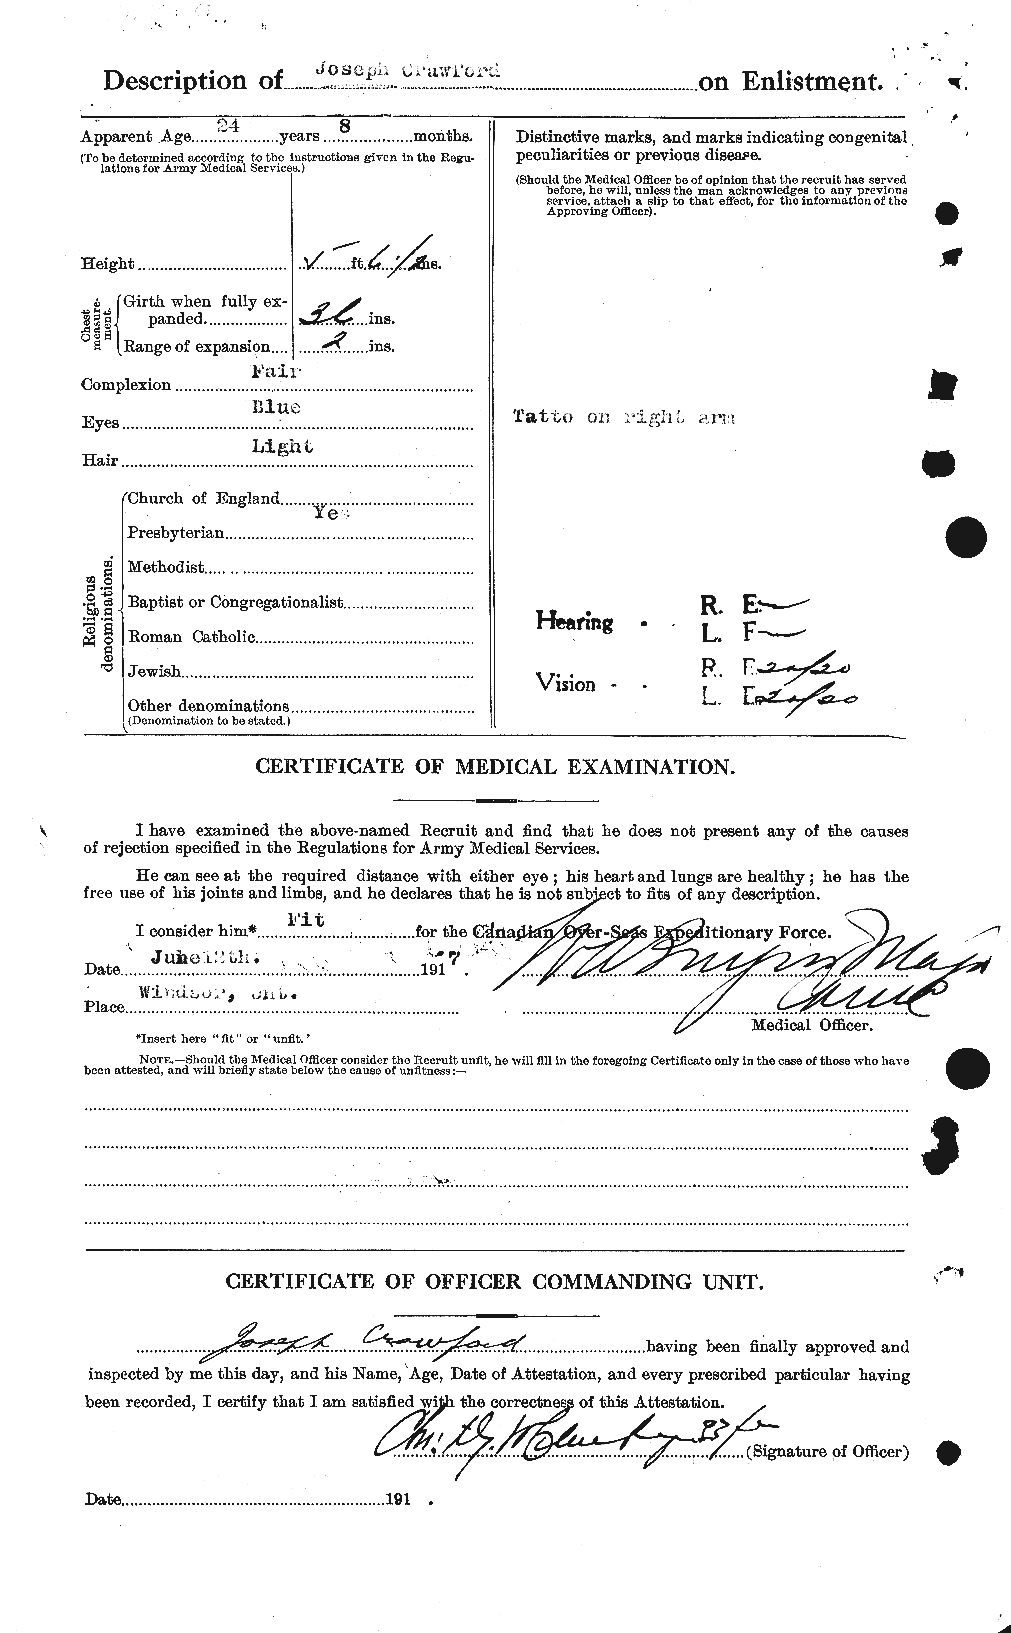 Personnel Records of the First World War - CEF 061814b